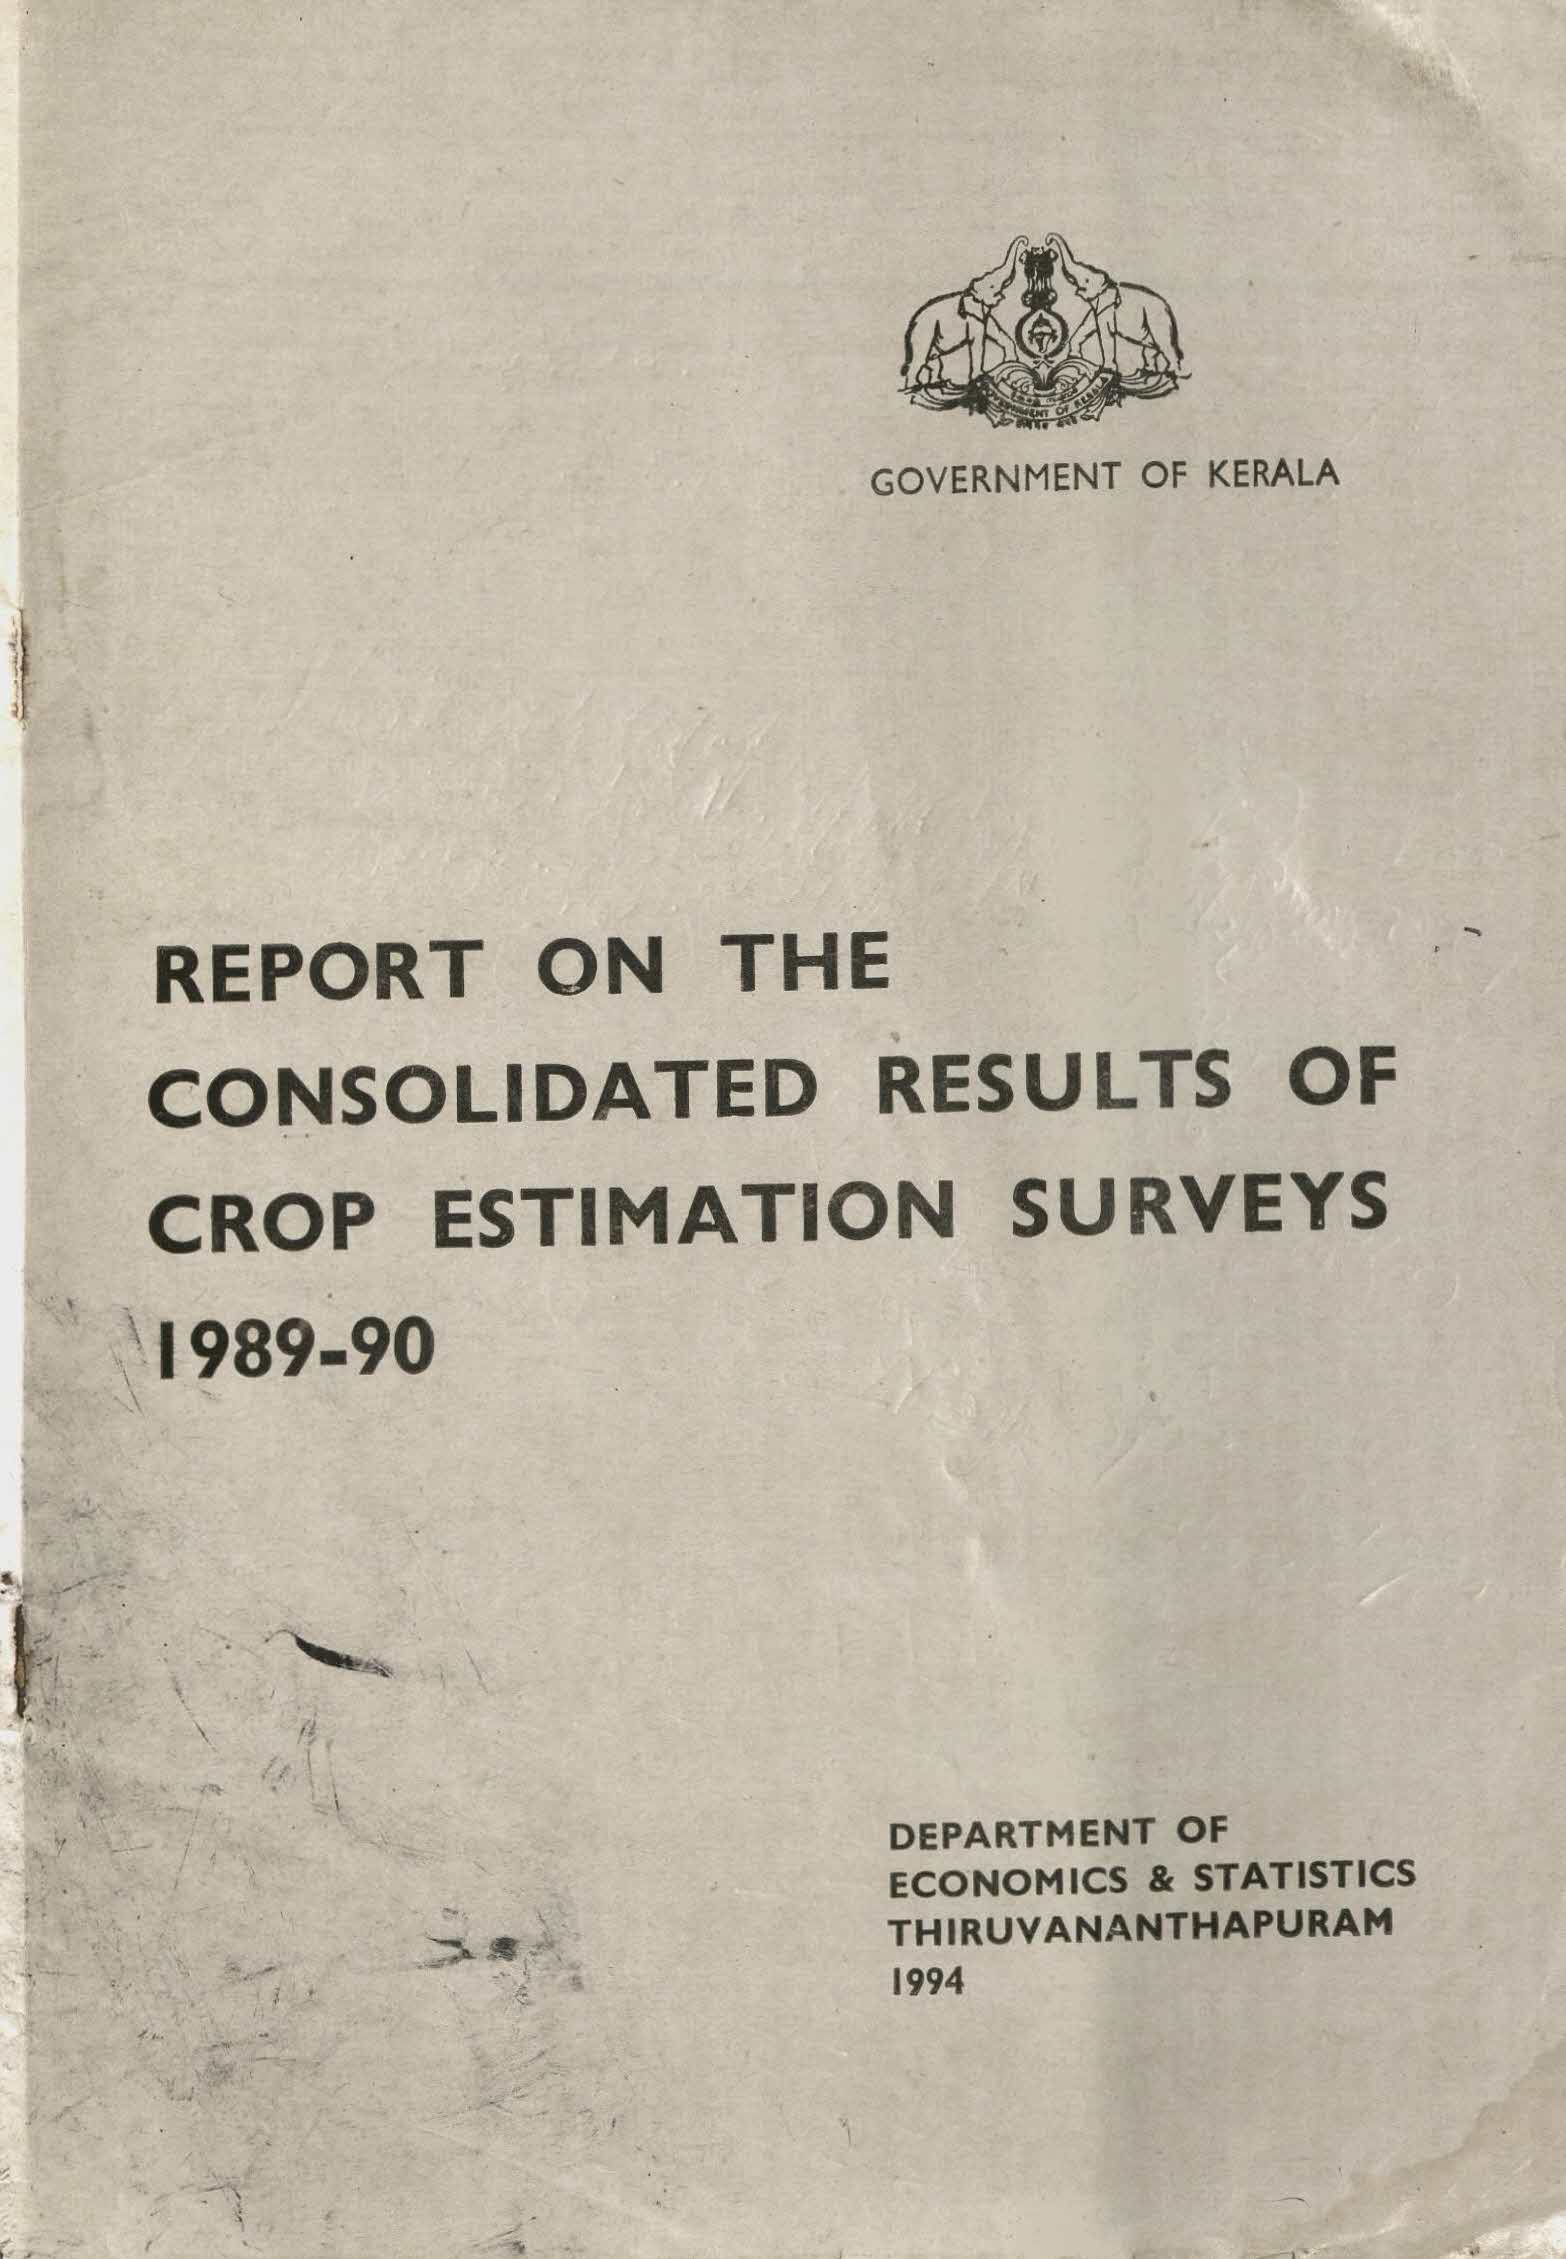 REPORT ON THE CONSOLIDATED RESULTS OF CROP ESTIMATION SURVEYS 1989-90